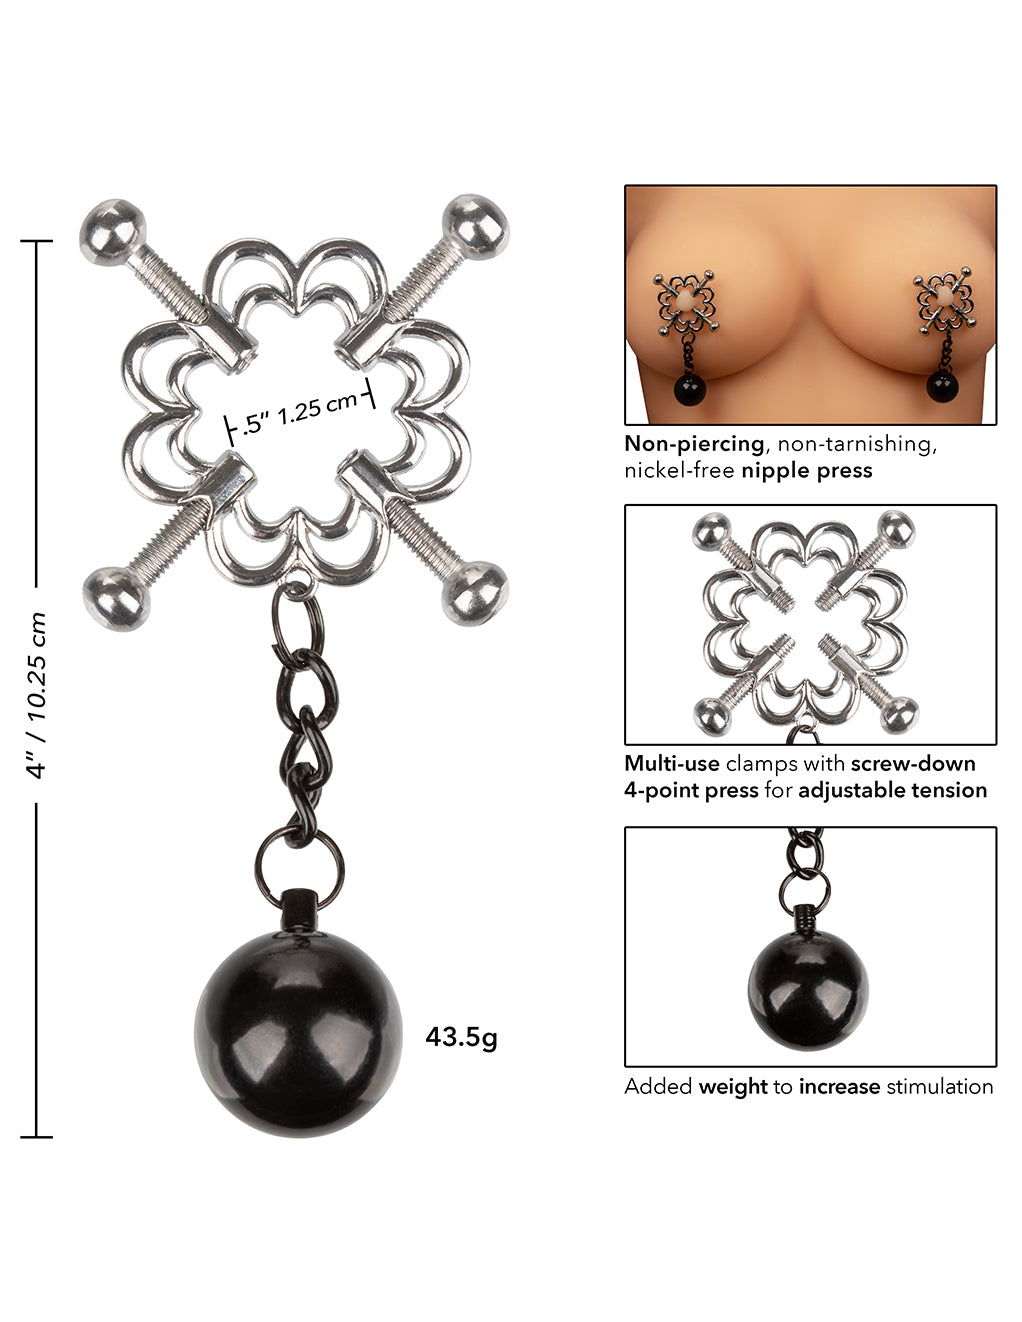 CalExotics Weighted Nipple Press- Dimensions